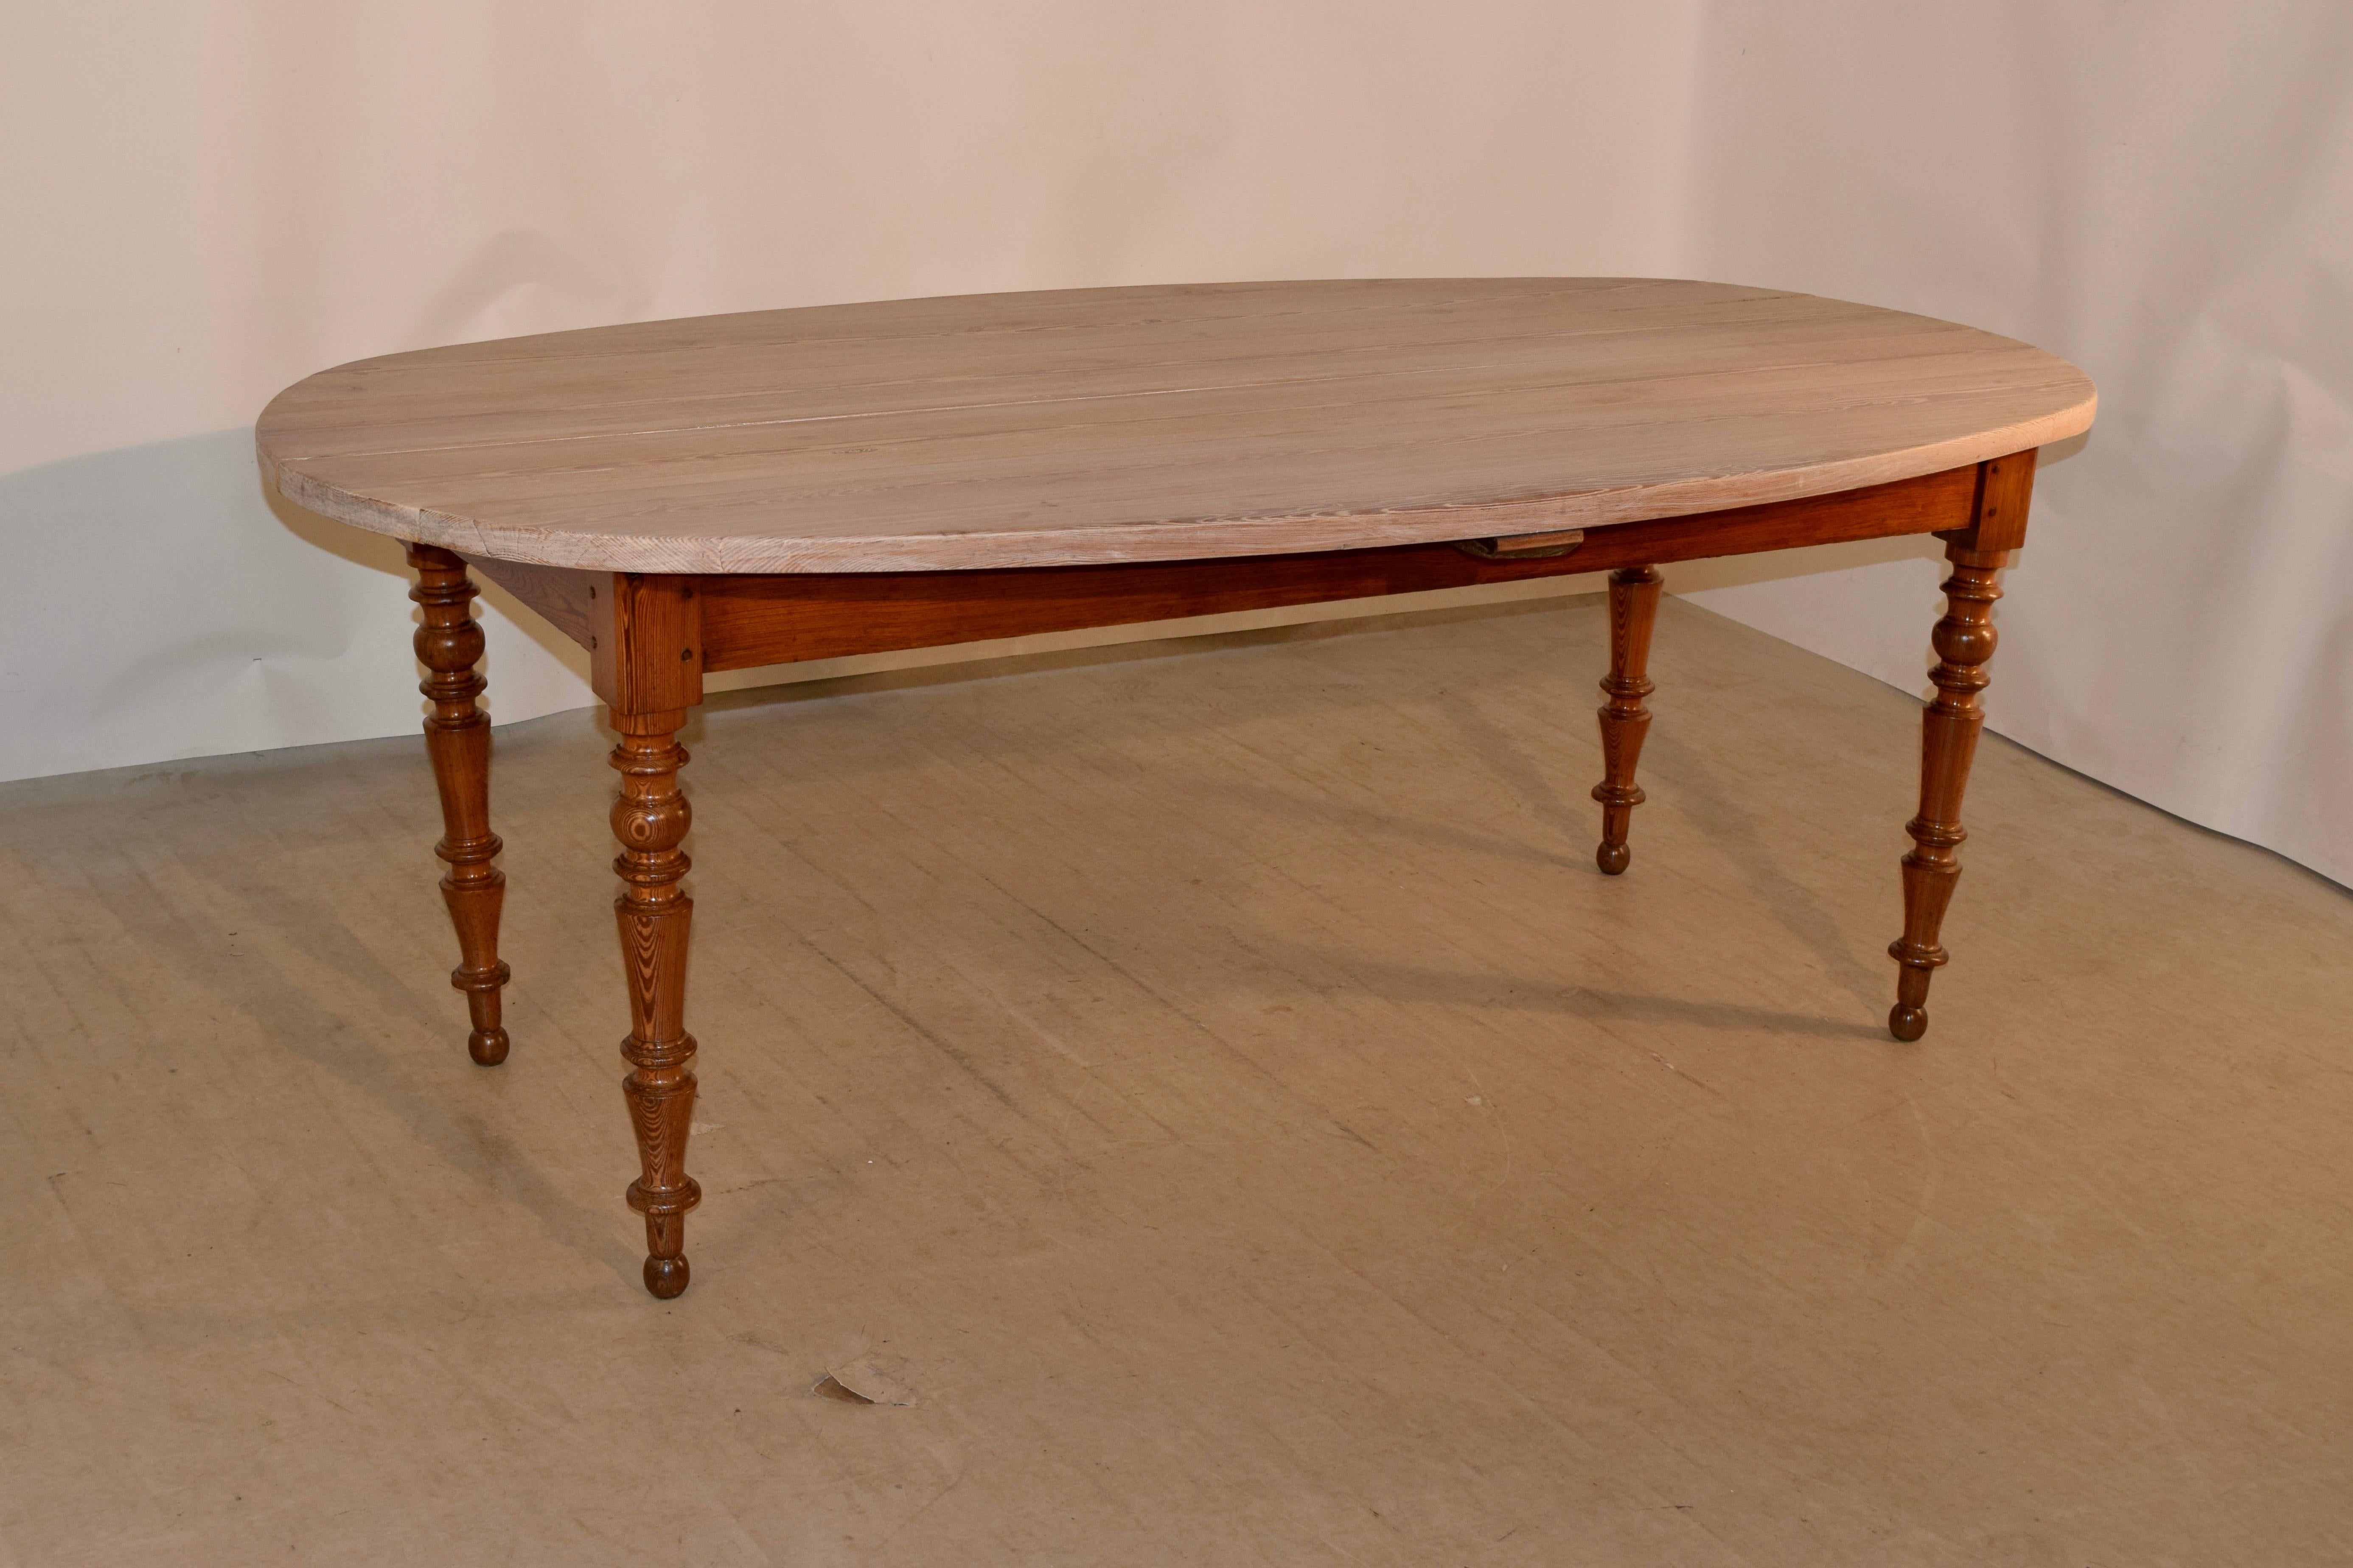 Unusual 19th century English pine farm table with oval shaped scrubbed pine top. The top is made from thick pine planks and follow down to a simple apron, which measures 23.63 inches in height. The table is supported on hand turned legs. Lovely form.